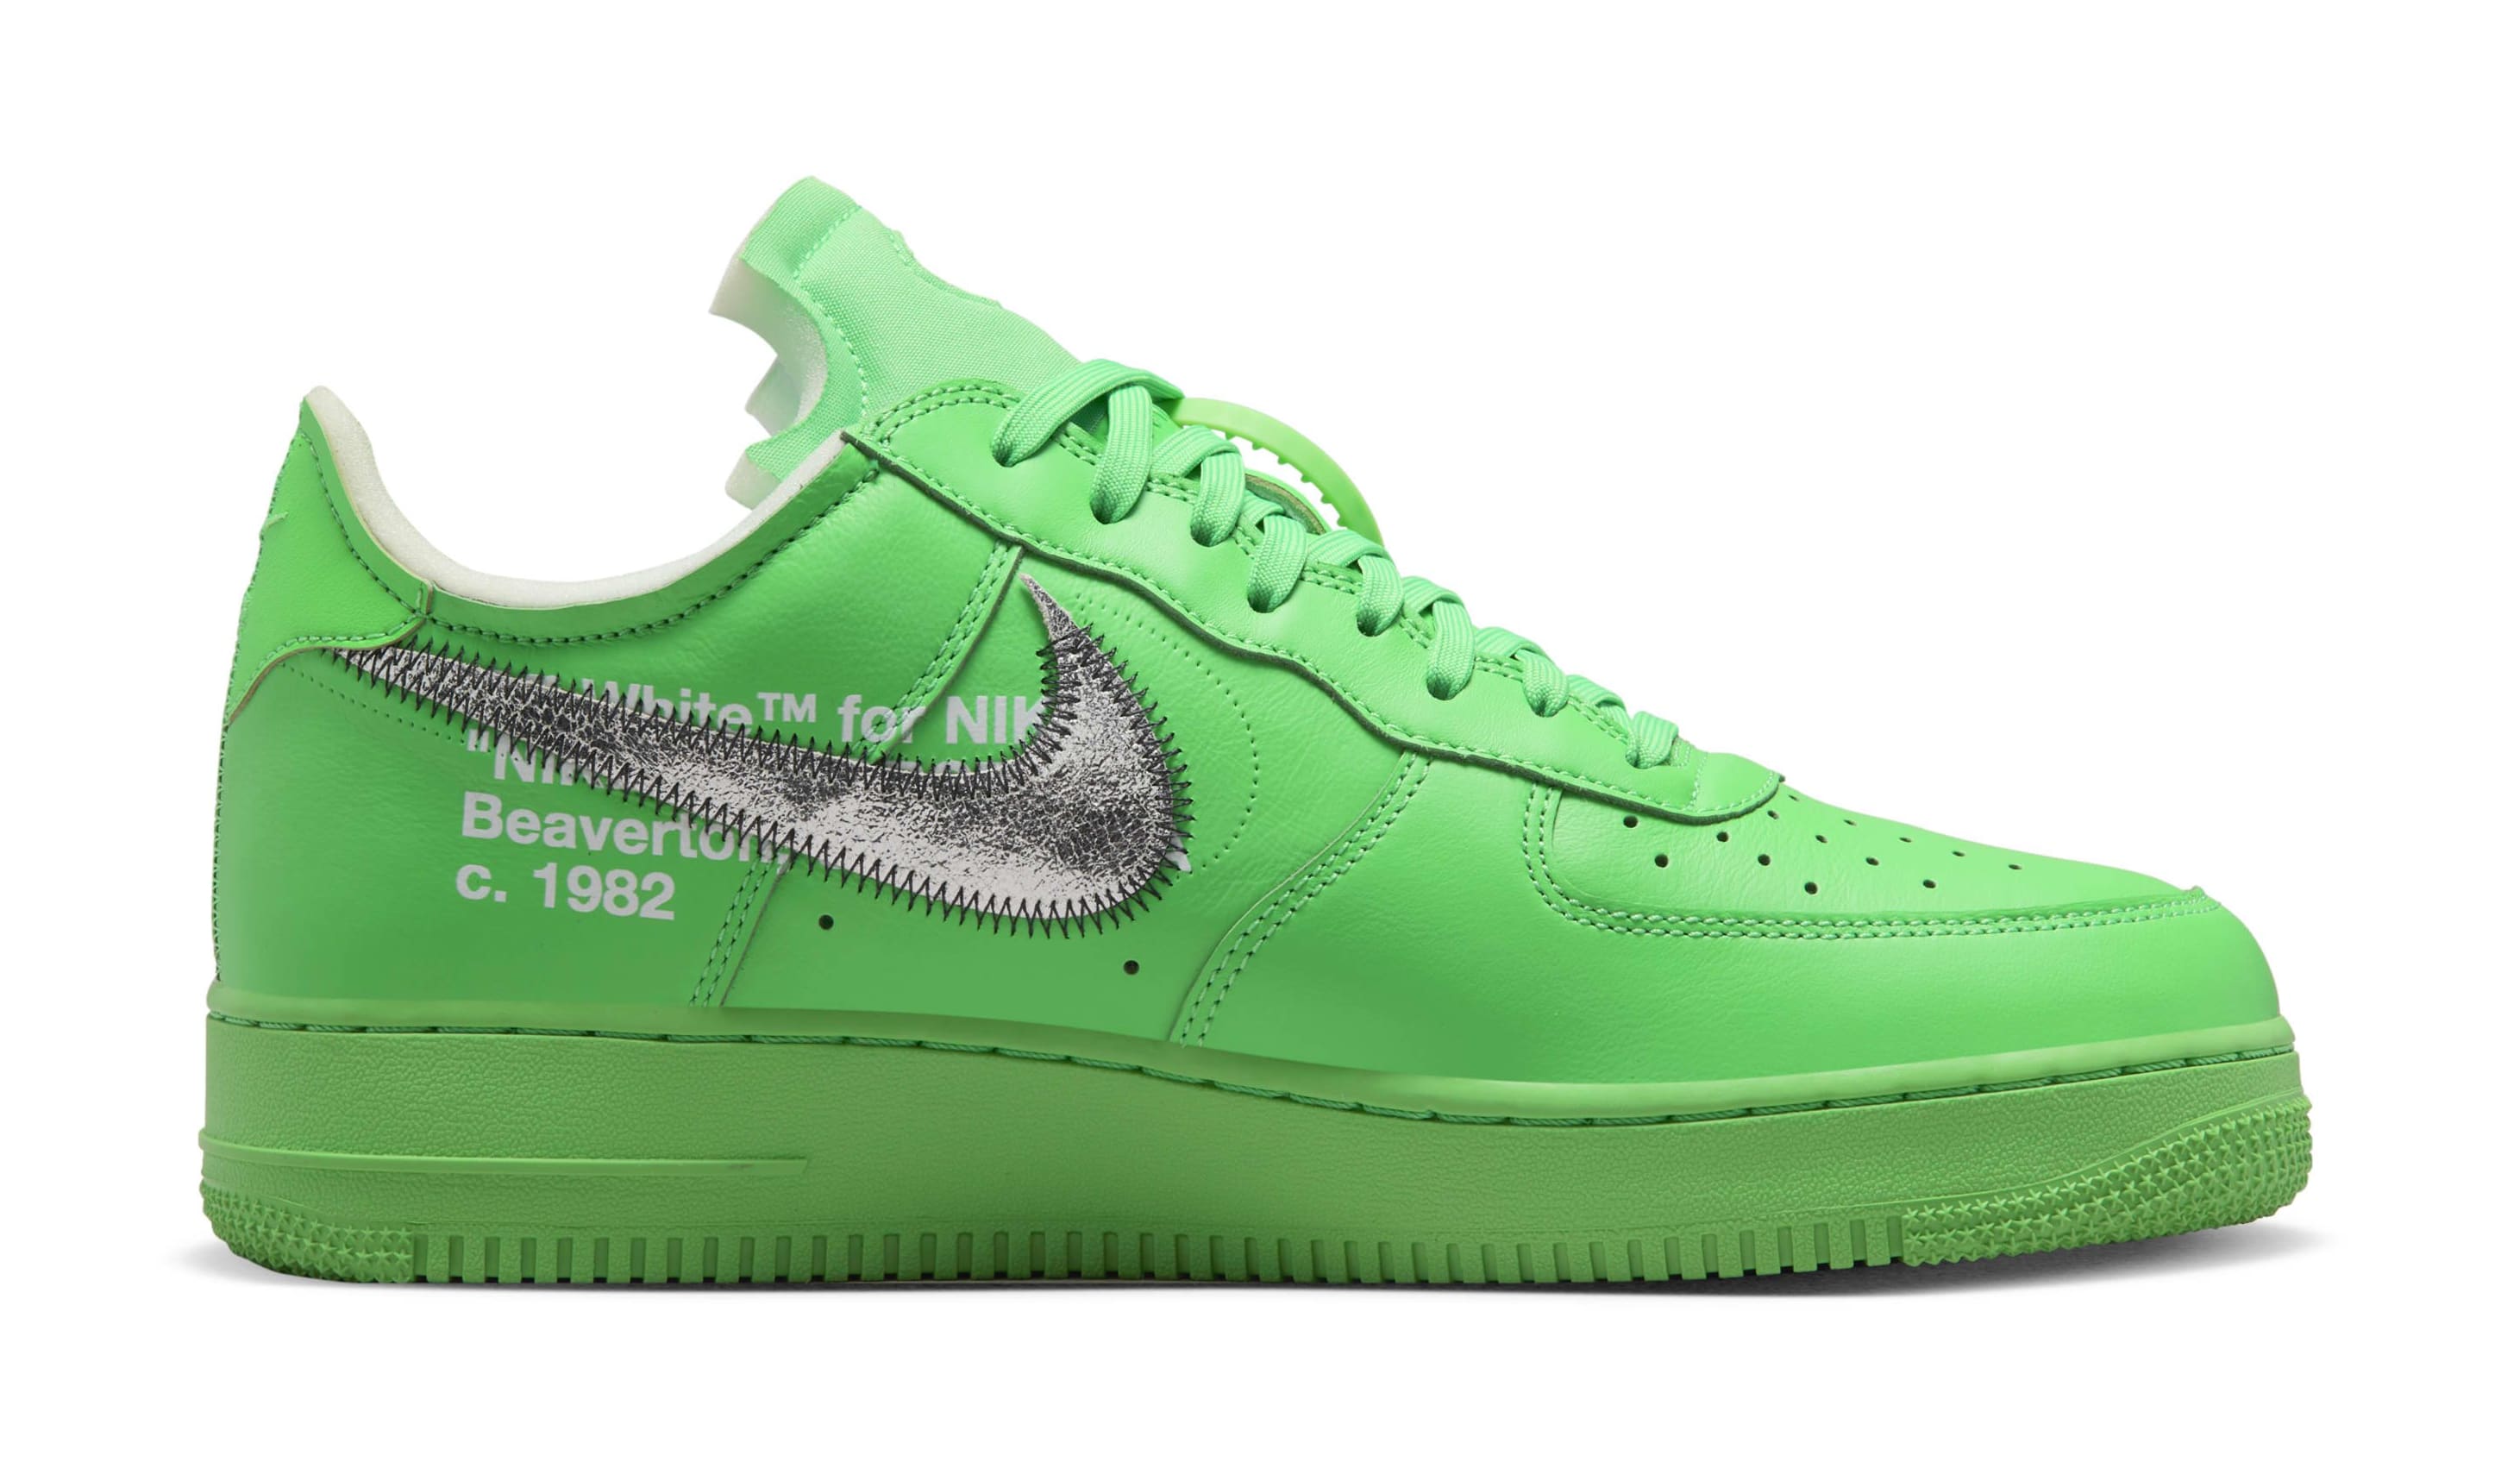 The Off-White x Nike Air Force 1 Low “Light Green Spark” Drops